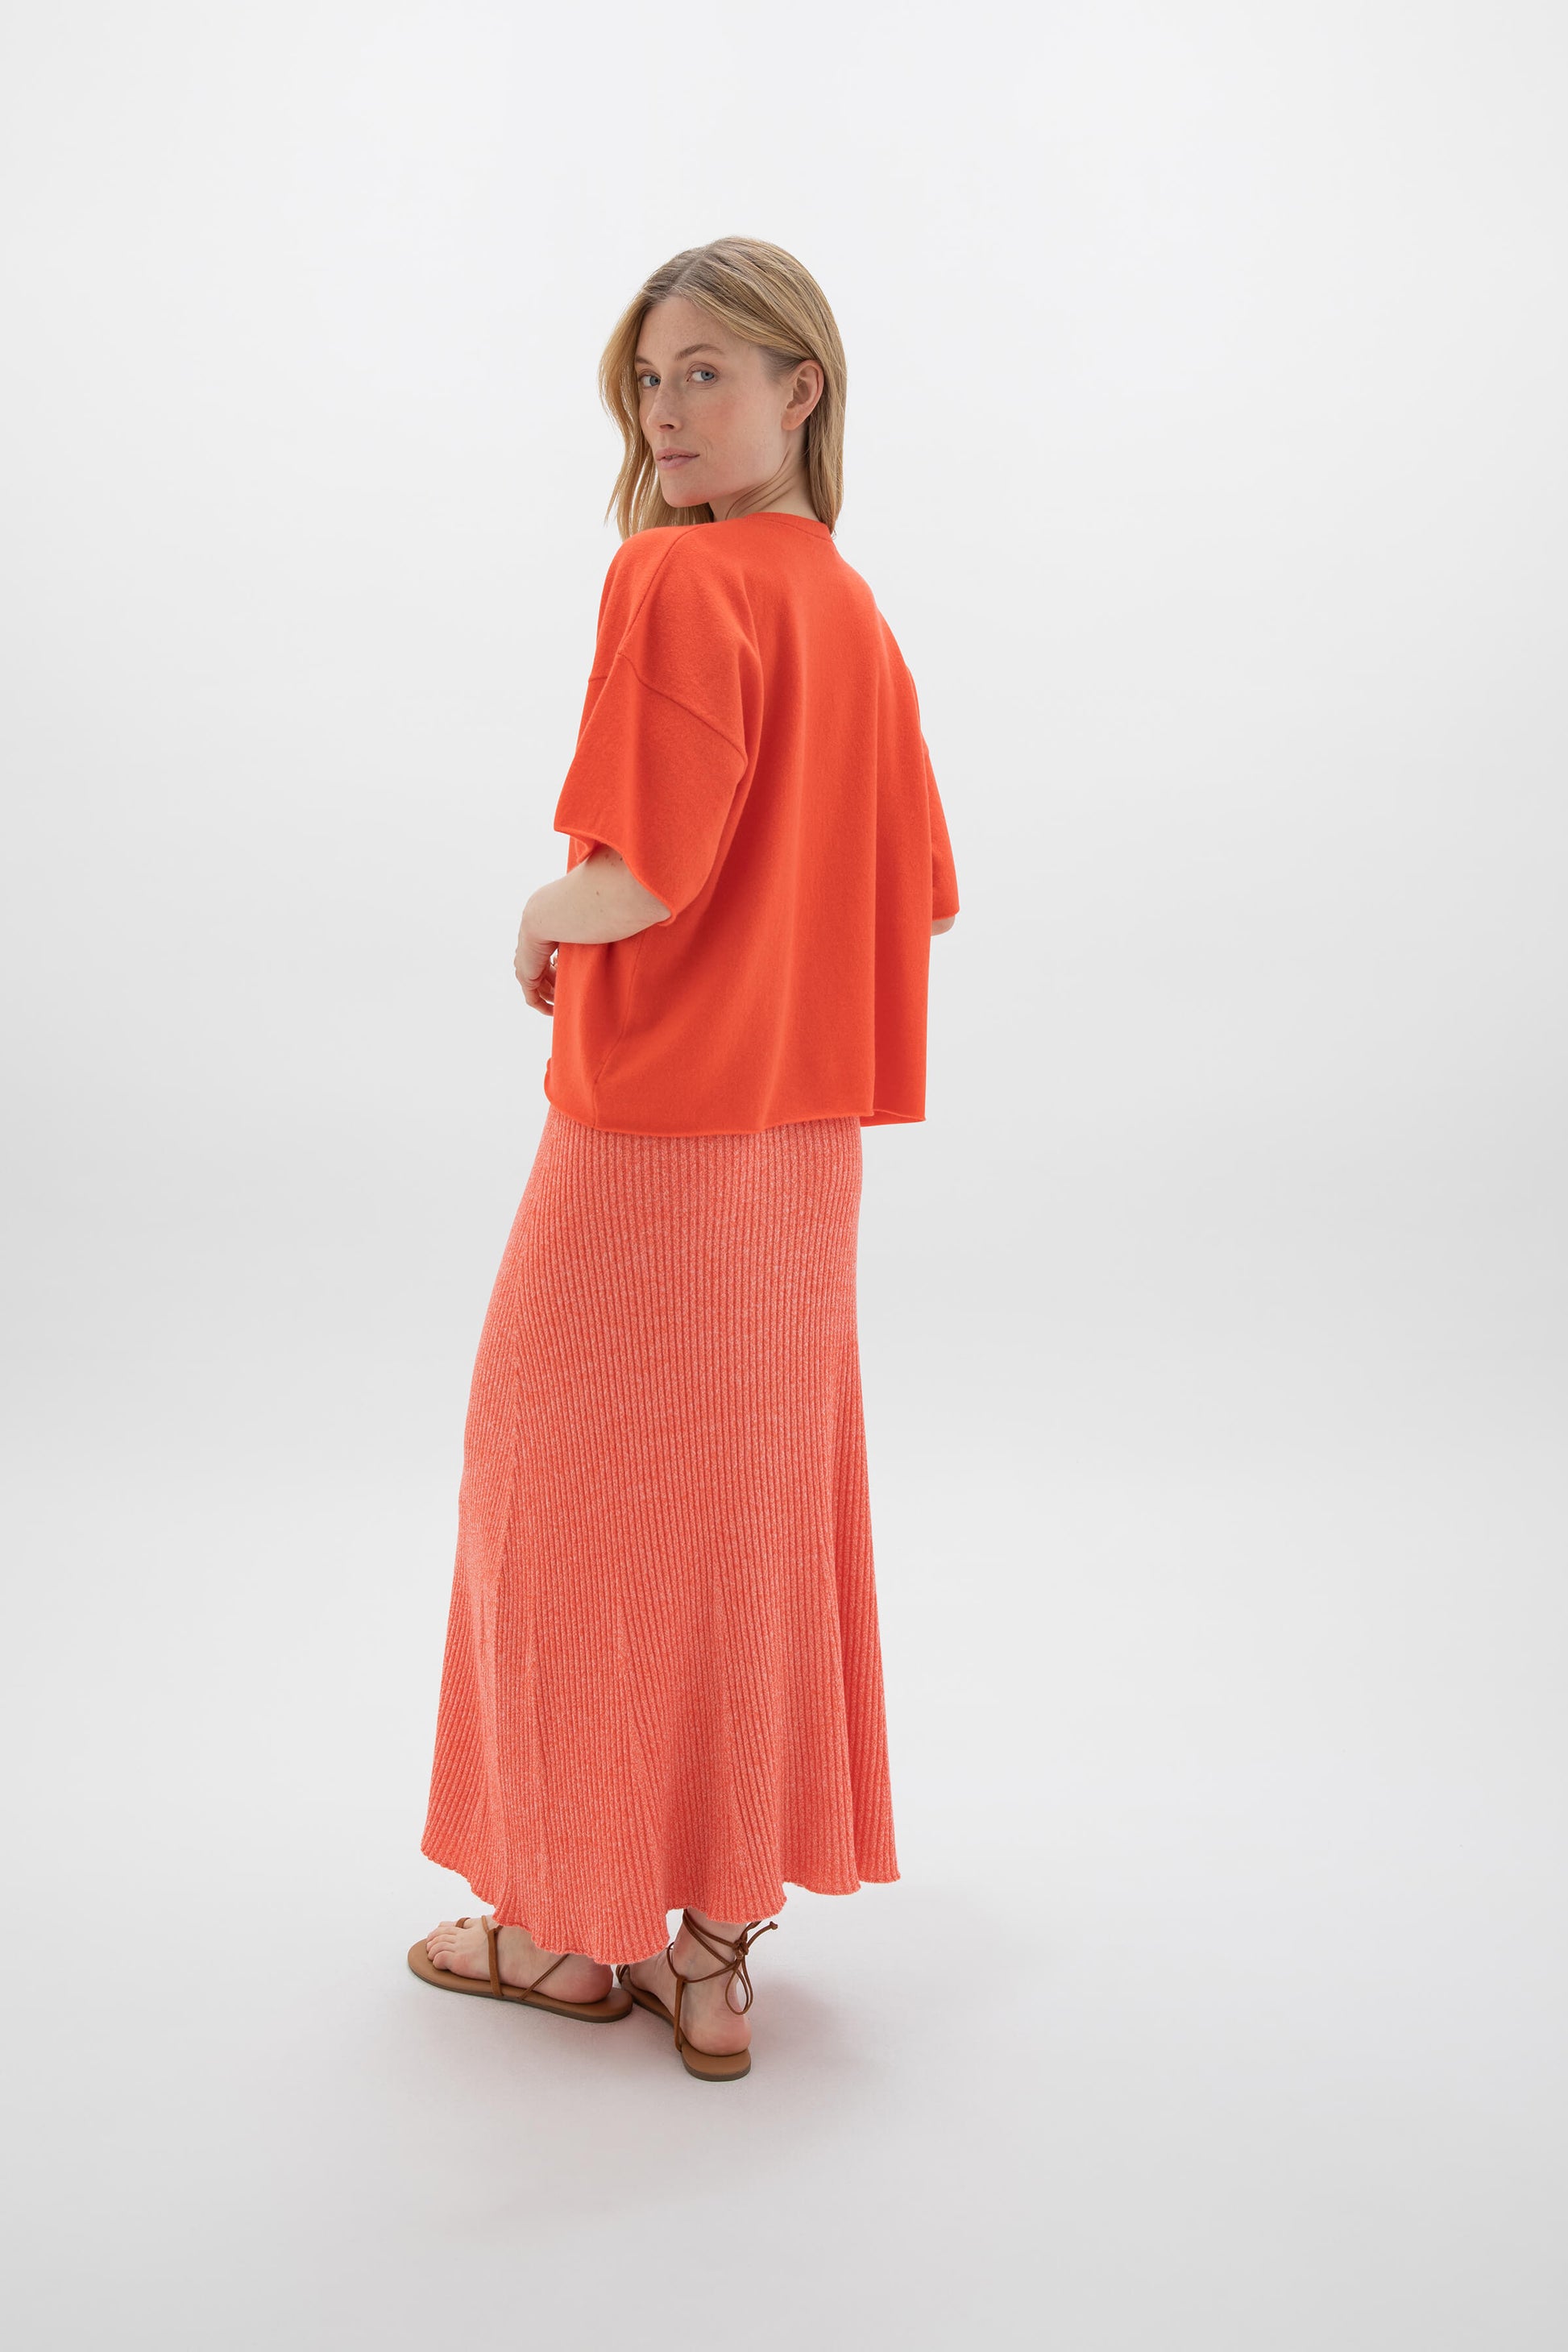 Johnstons of Elgin SS24 Women's Knitwear Coral Marl Ribbed Marl Cashmere Skirt KAI05206Q24282